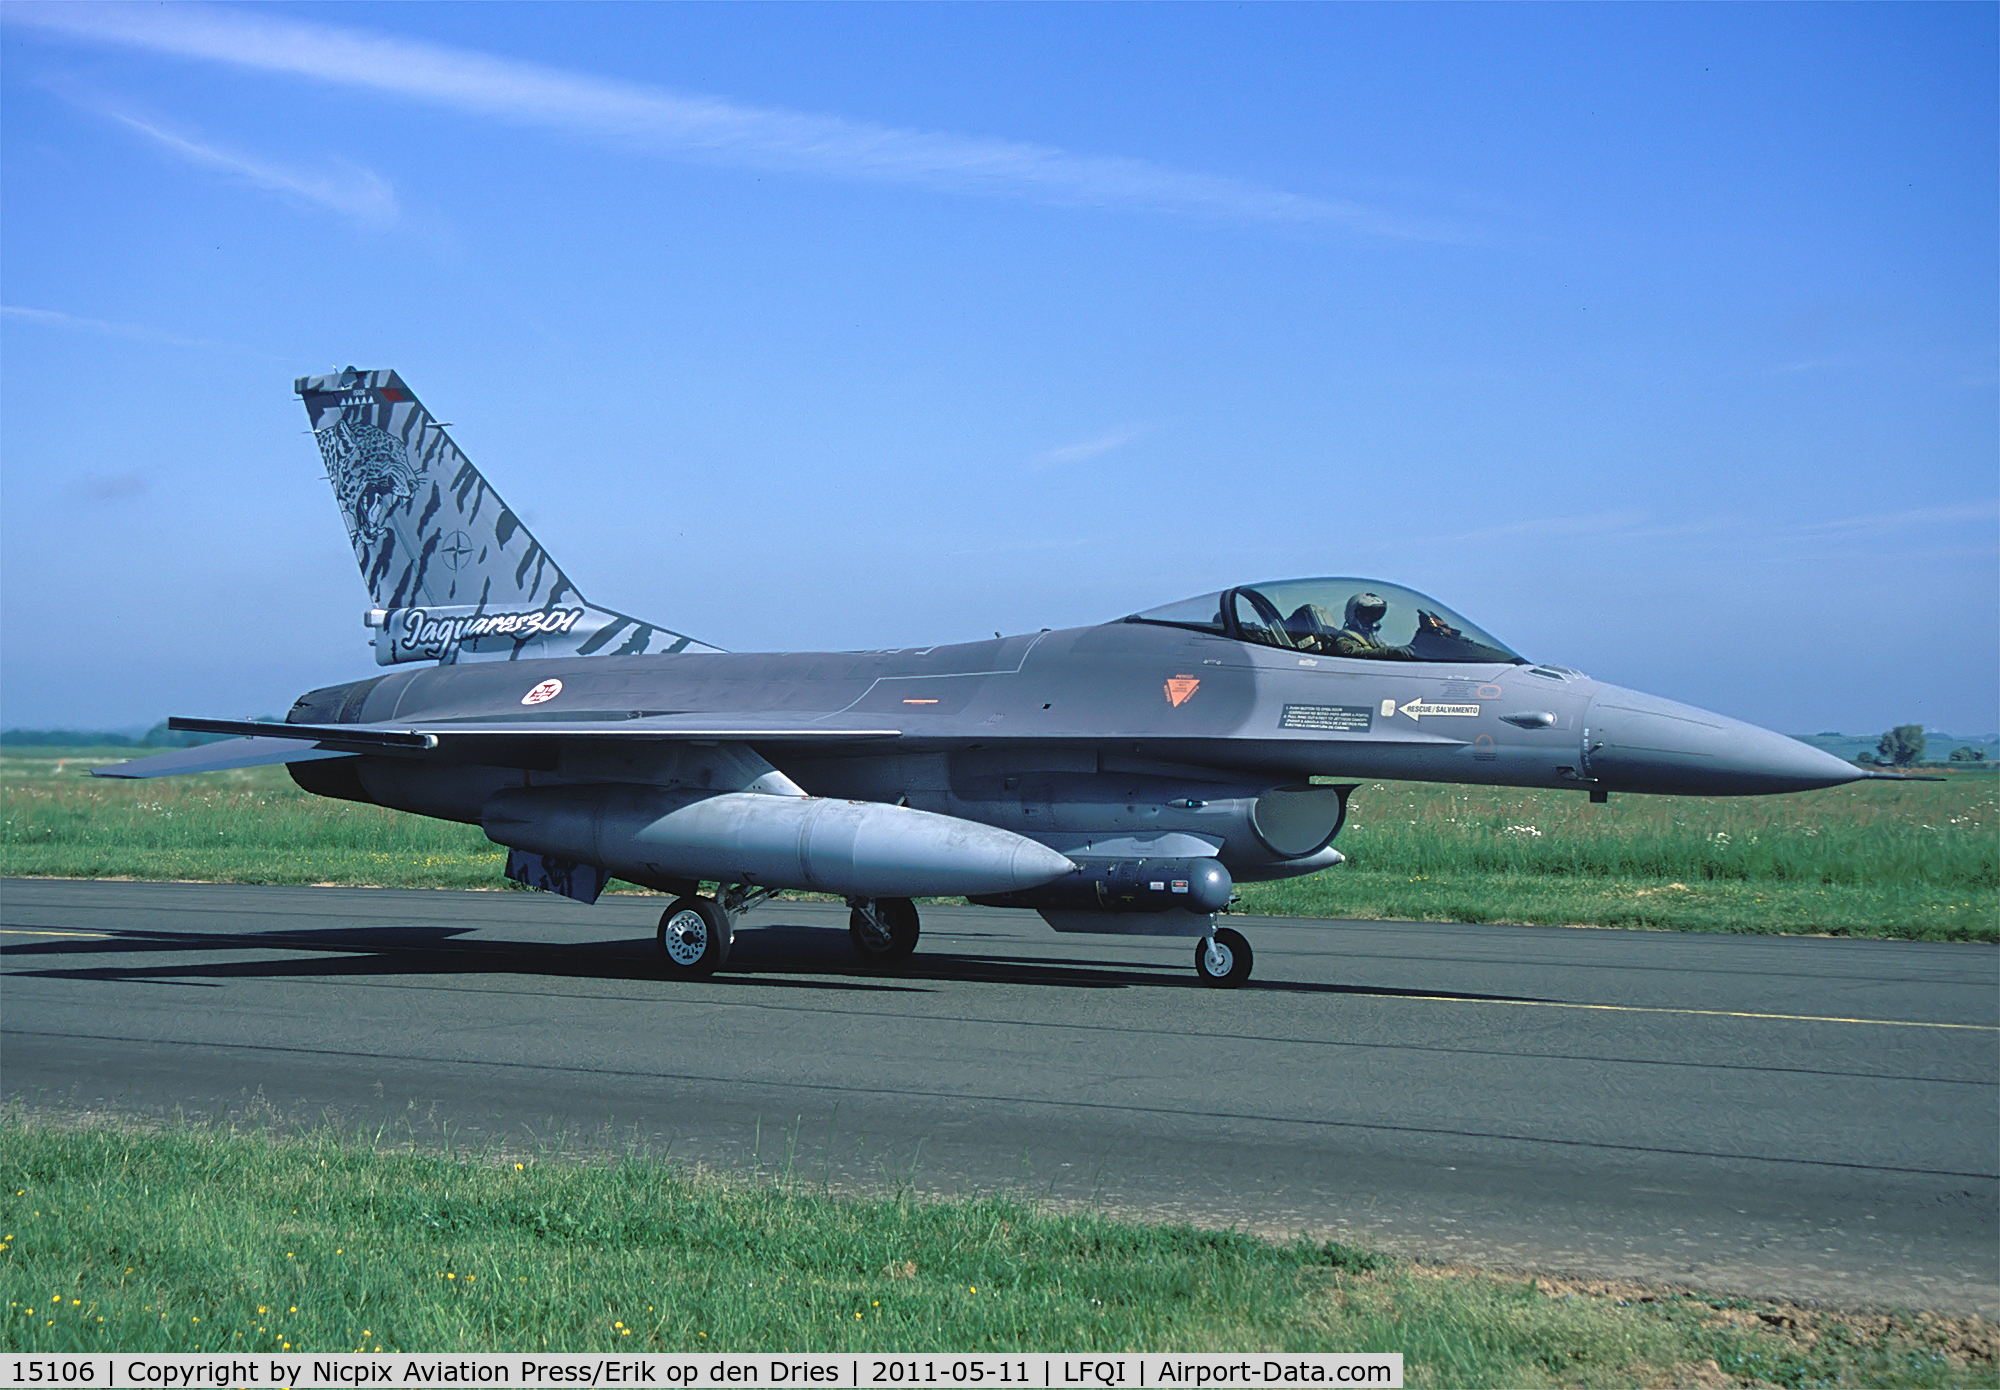 15106, Lockheed F-16A Fighting Falcon C/N AA-6, 15106 is a Portuguese AF F-16AM with a special tail of the 